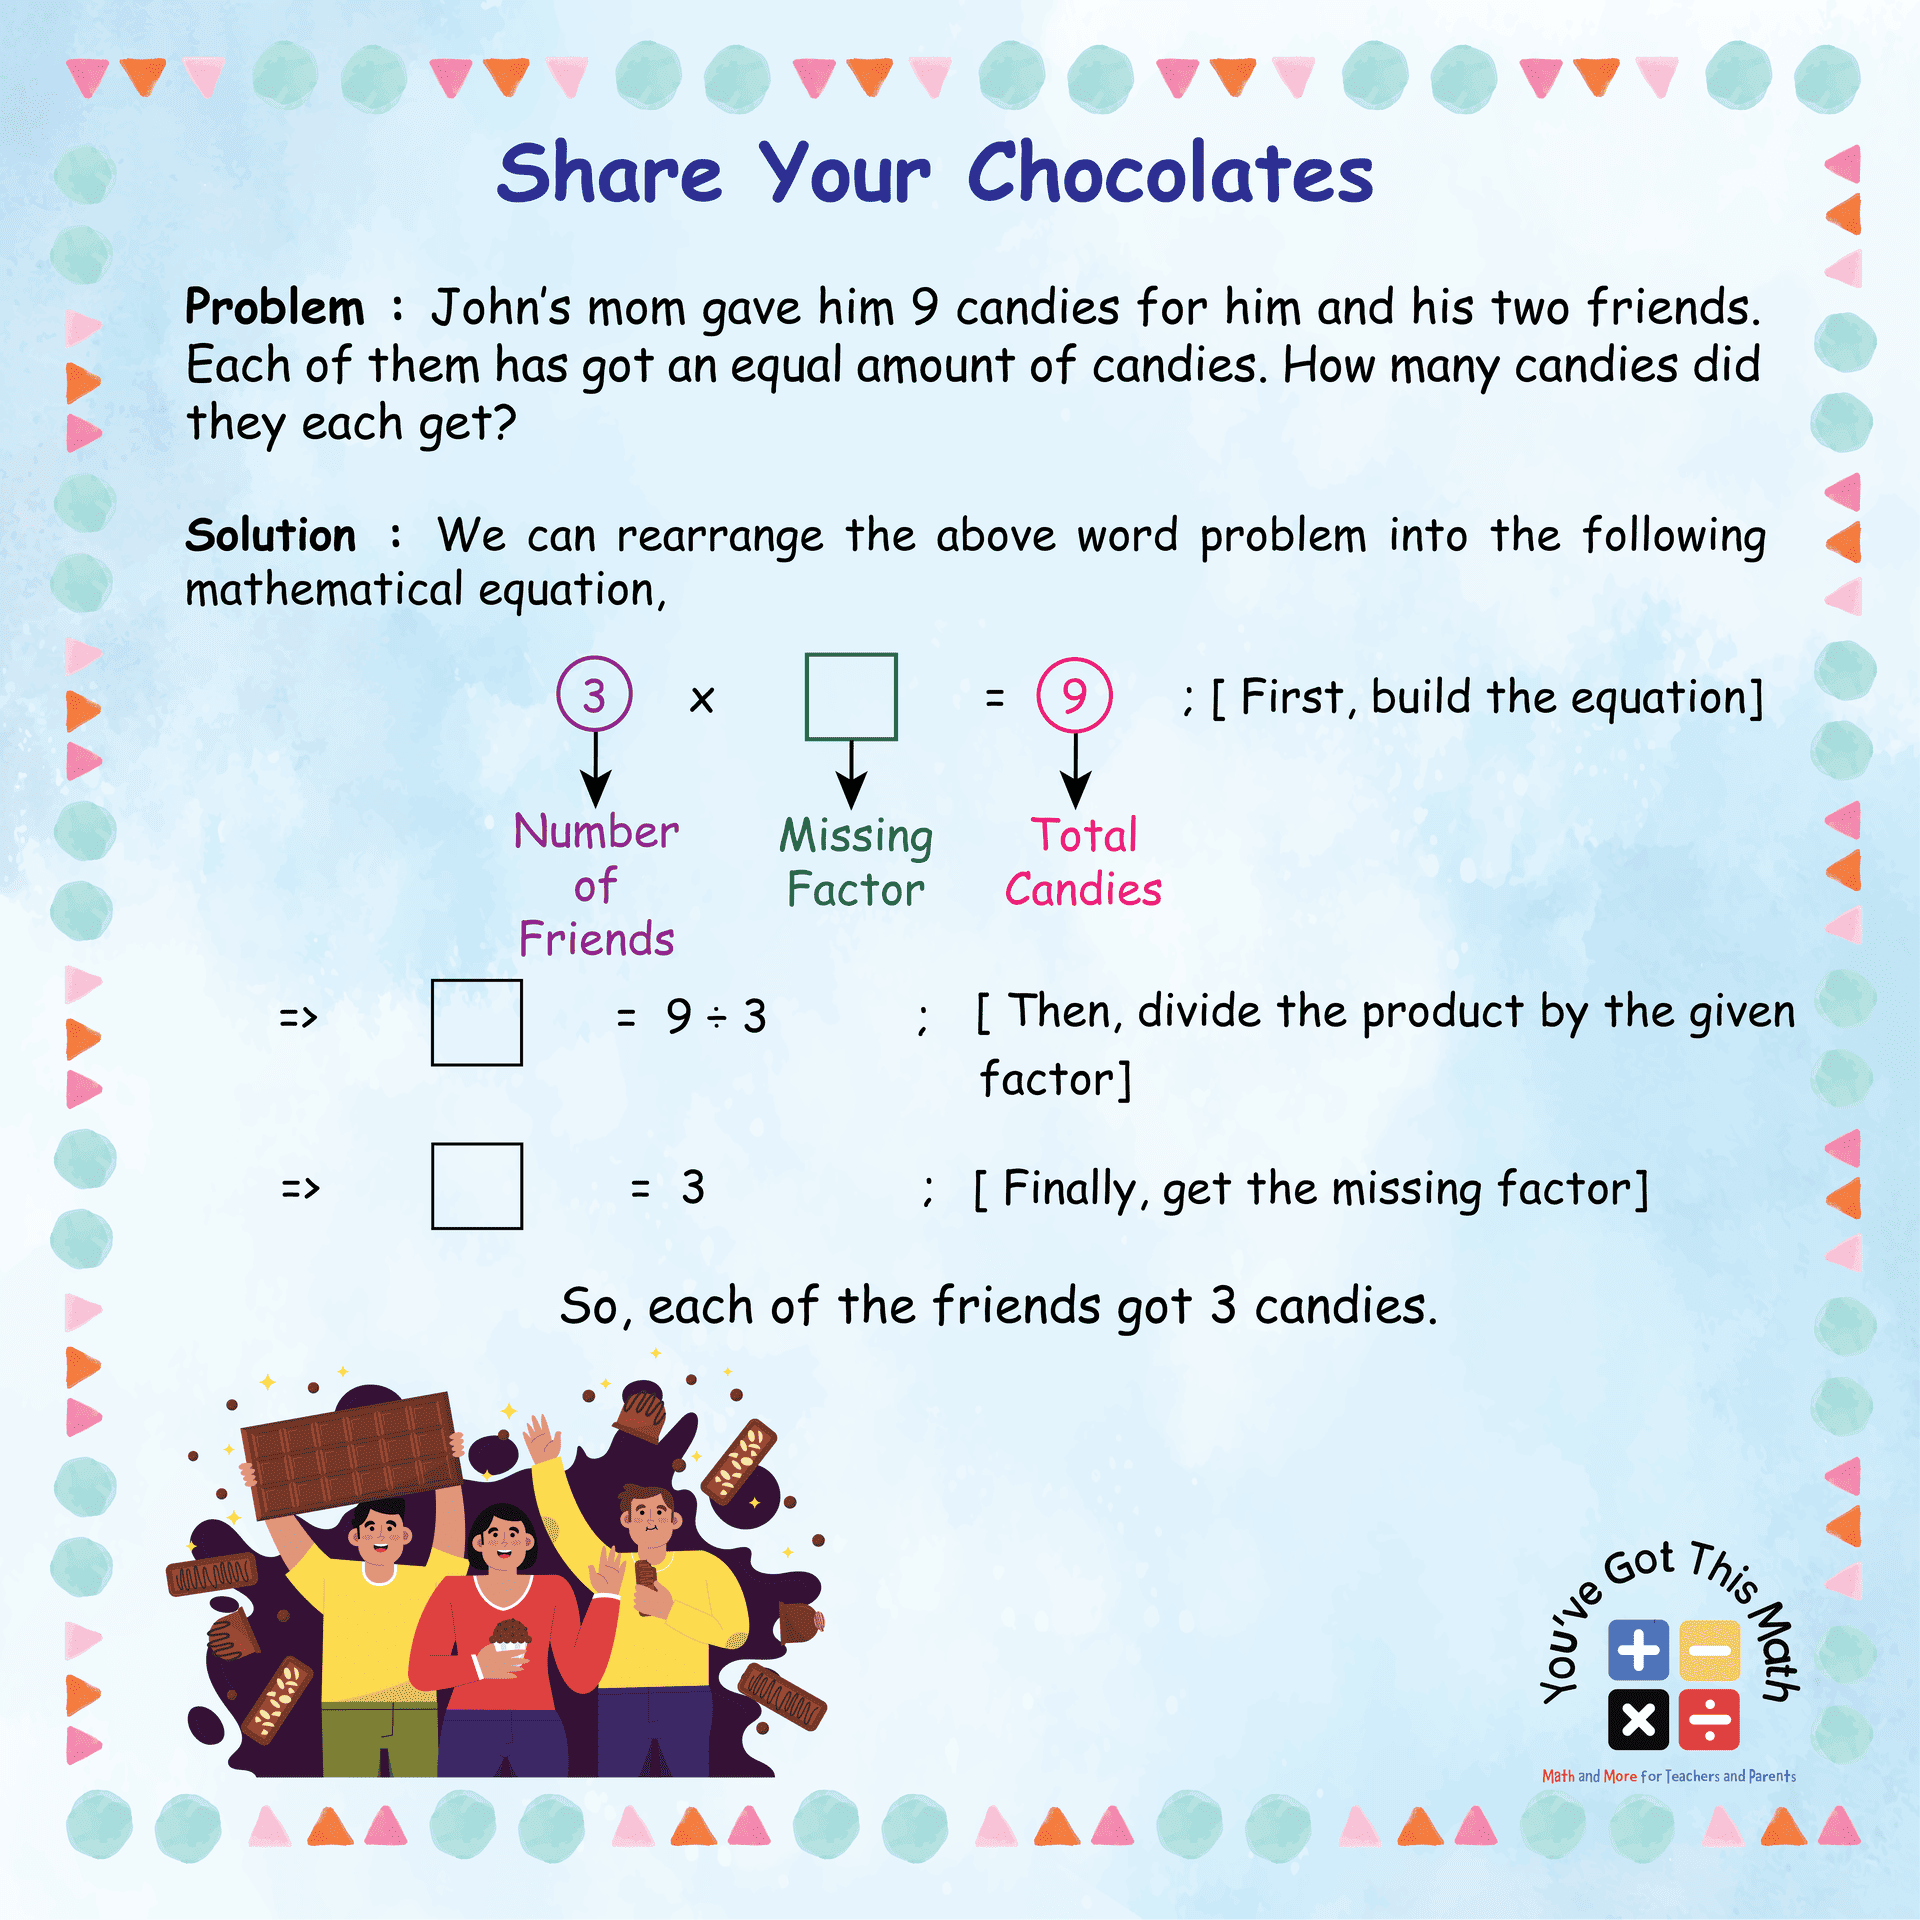 Finding Missing Factor to Share Chocolates